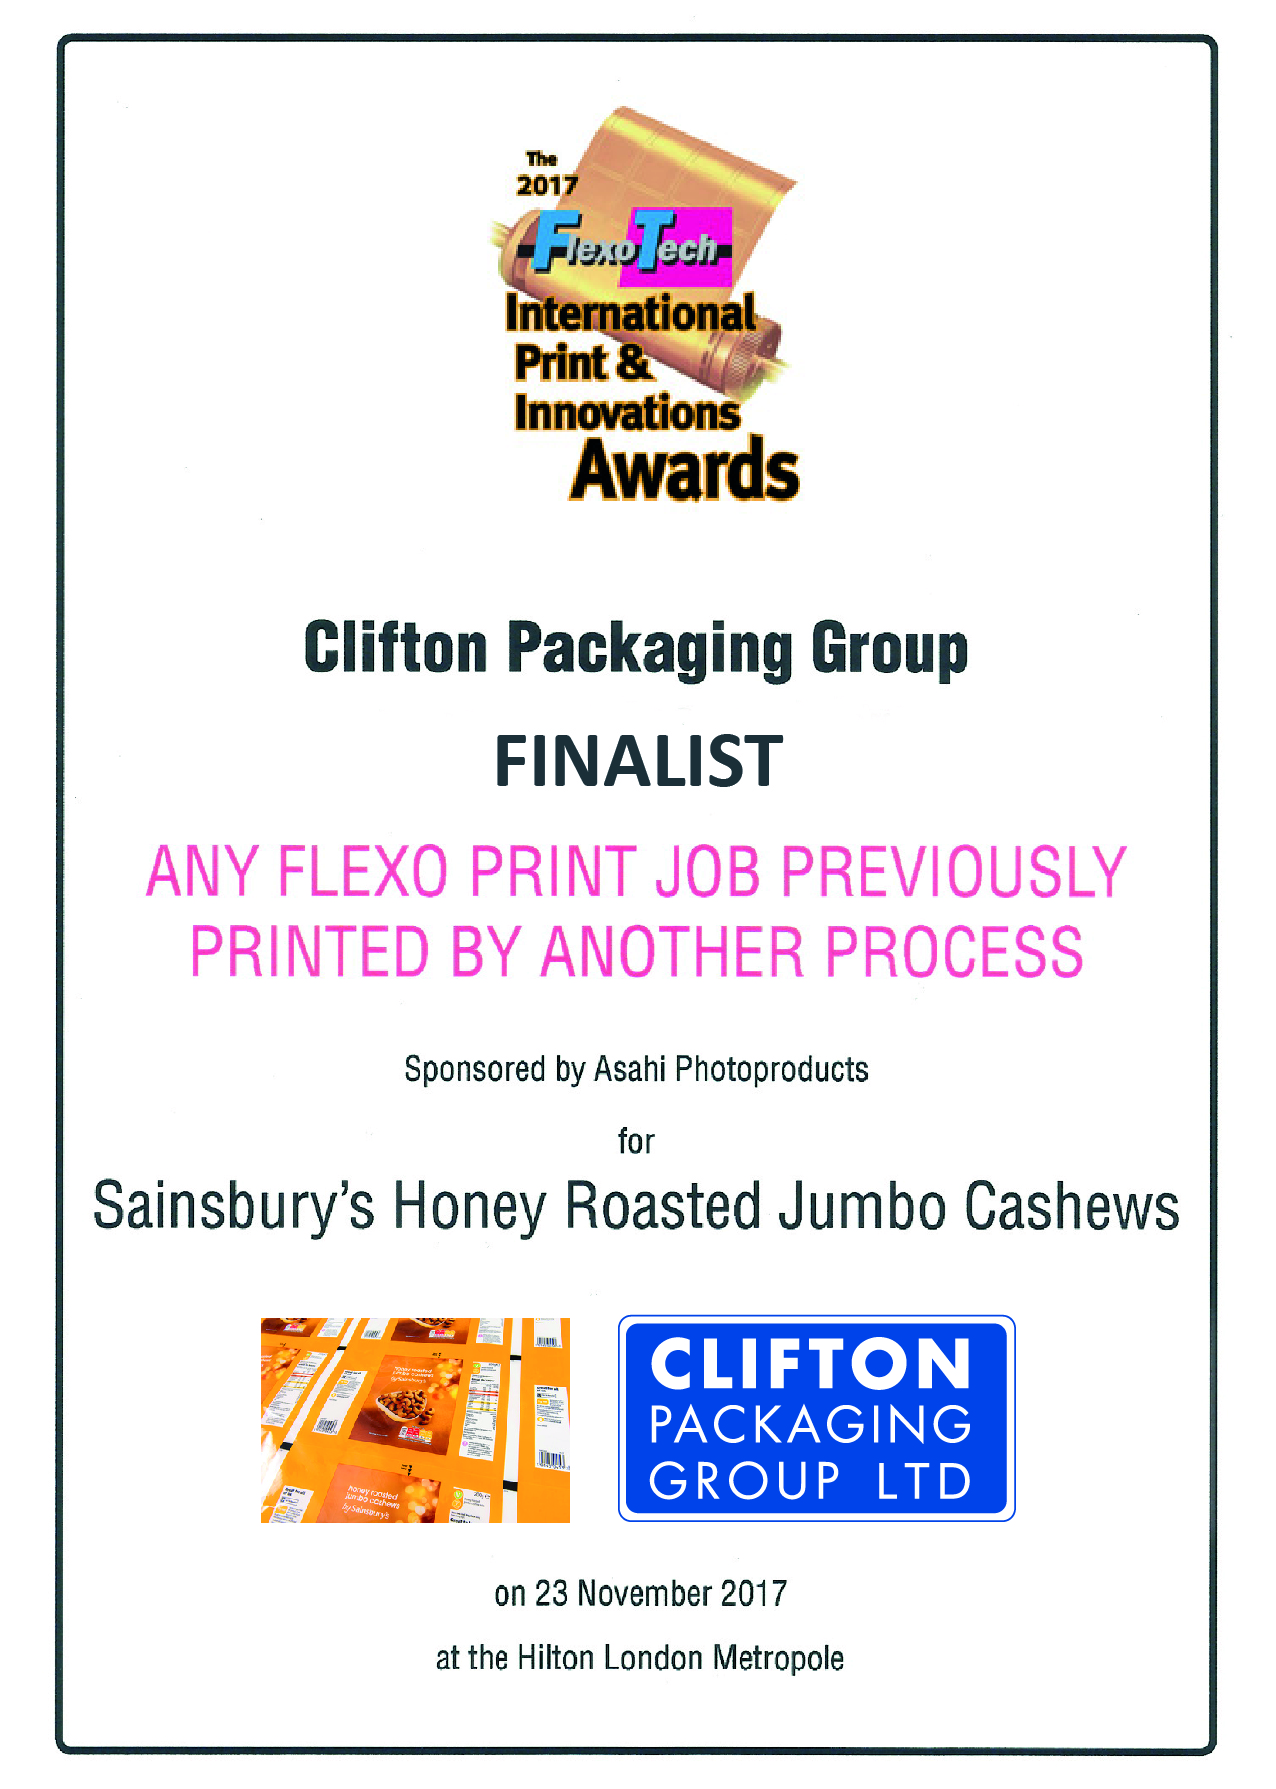 Flexo Tech Awards 2017, Finalist Any Flexo Print Job Previously Printed by another process